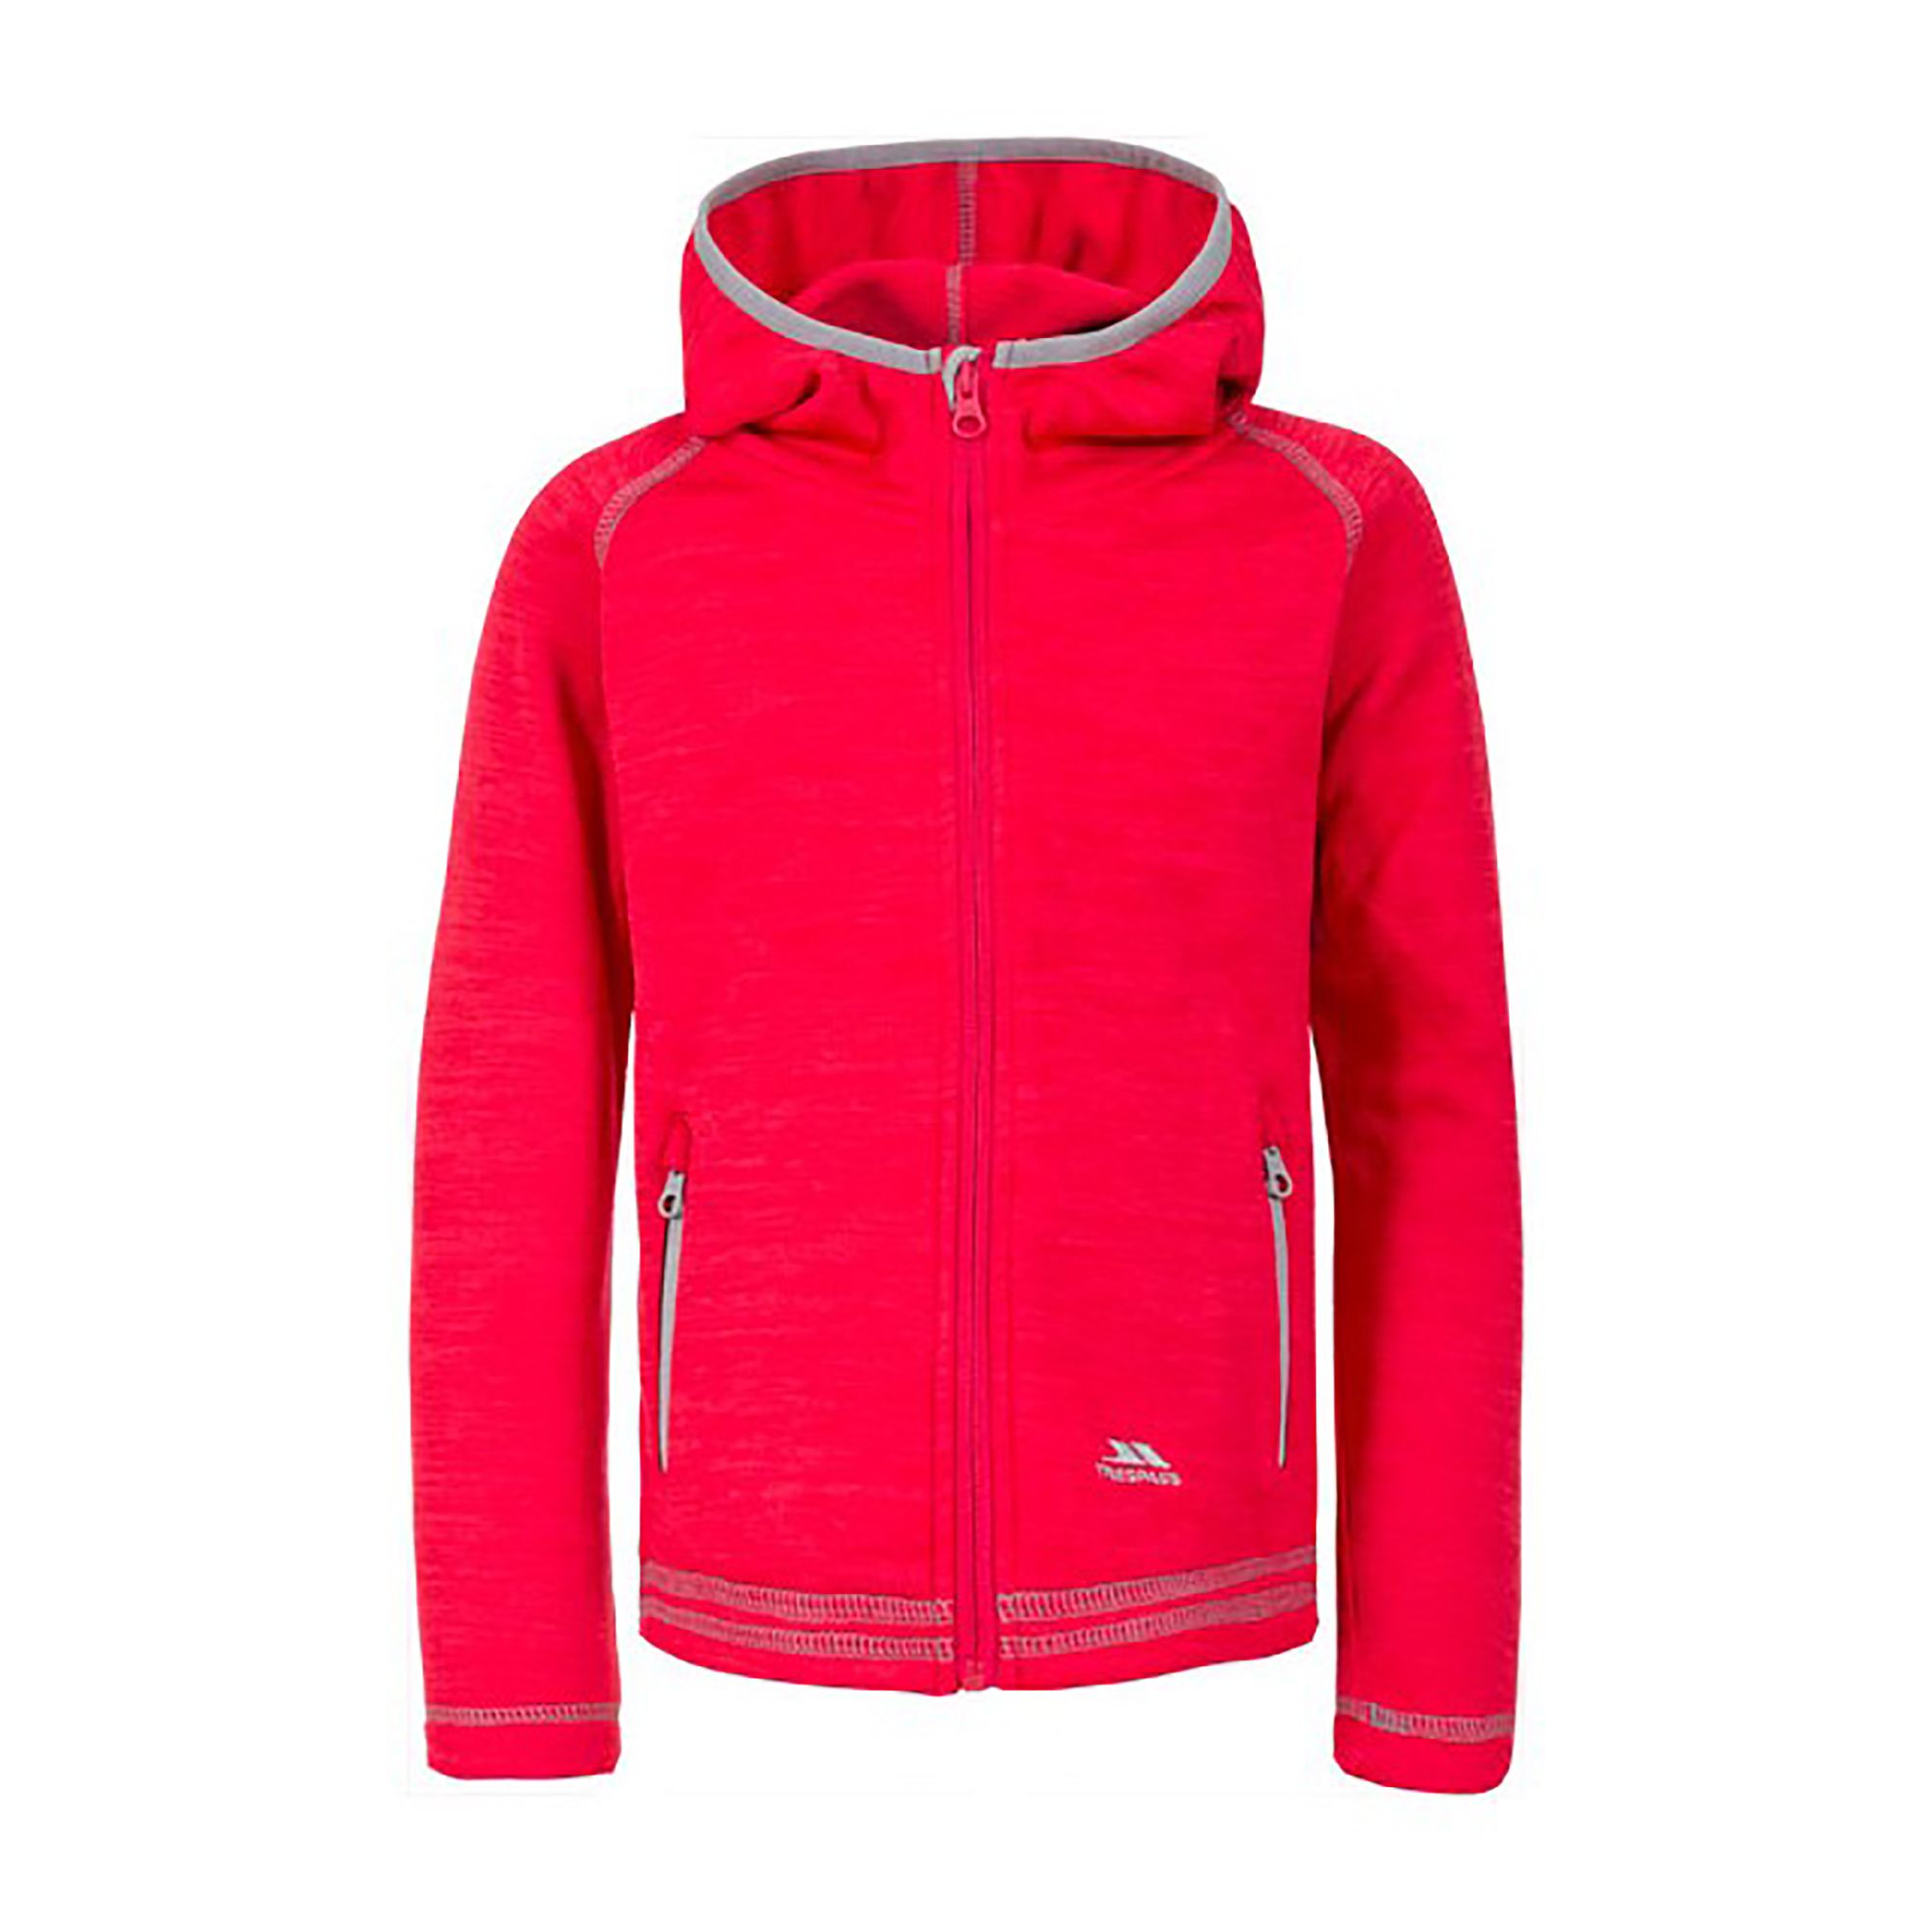 Hooded style. Full front zip. 2 low profile zip pockets. Chin guard. Stretch binding at hood. Coverstitch detail. 100% Polyester. Trespass Childrens Chest Sizing (approx): 2/3 Years - 21in/53cm, 3/4 Years - 22in/56cm, 5/6 Years - 24in/61cm, 7/8 Years - 26in/66cm, 9/10 Years - 28in/71cm, 11/12 Years - 31in/79cm.